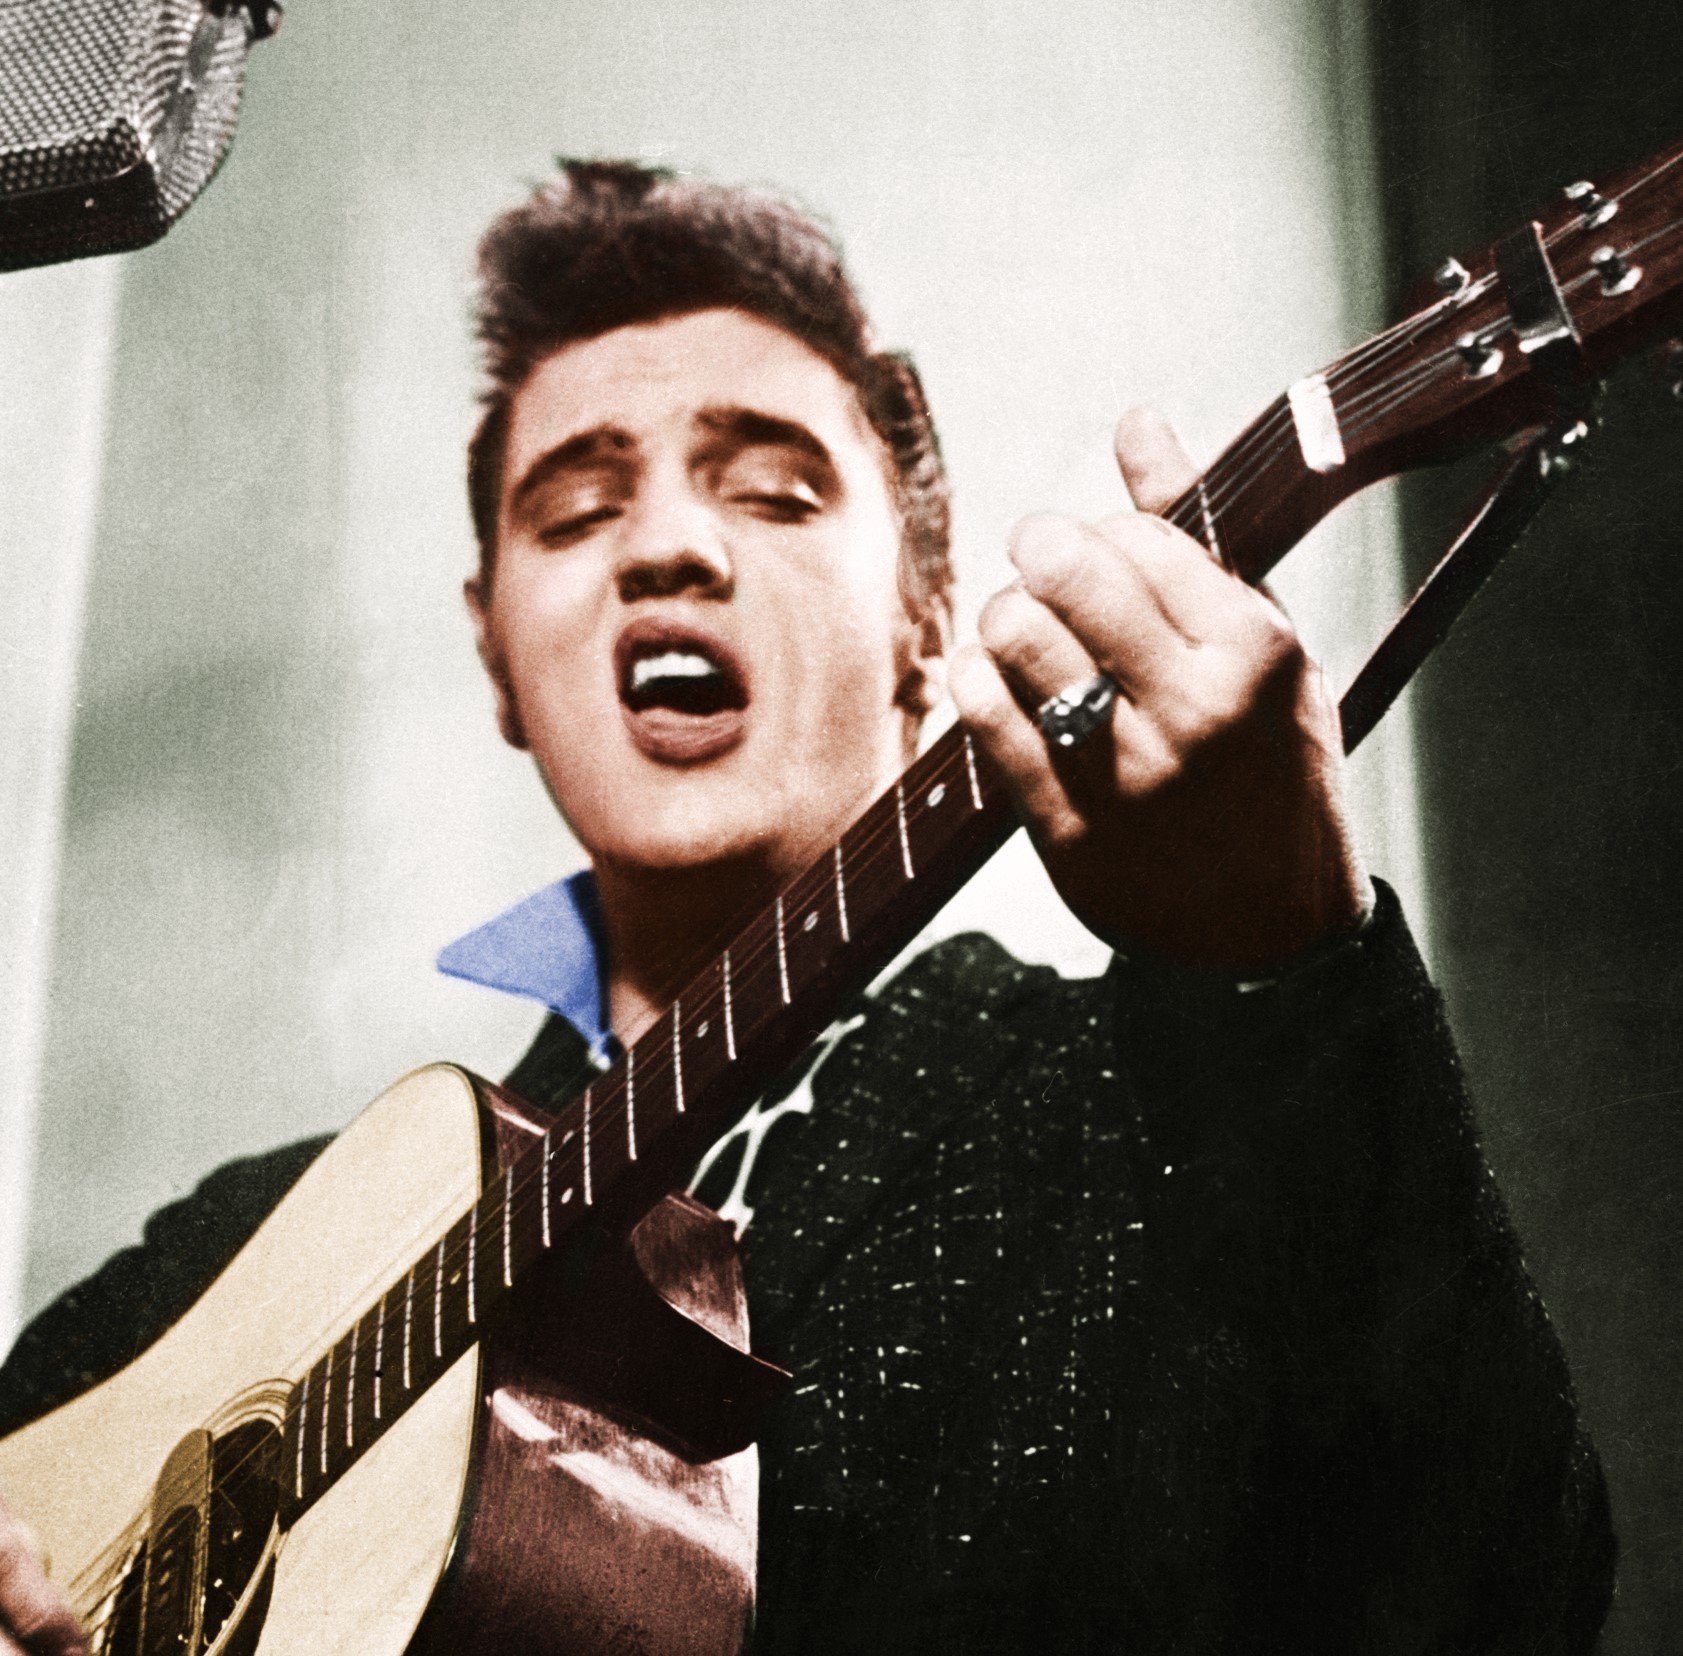 Why Elvis Presley's Songwriter Didn't Like His Song 'Bossa Nova Baby' Much